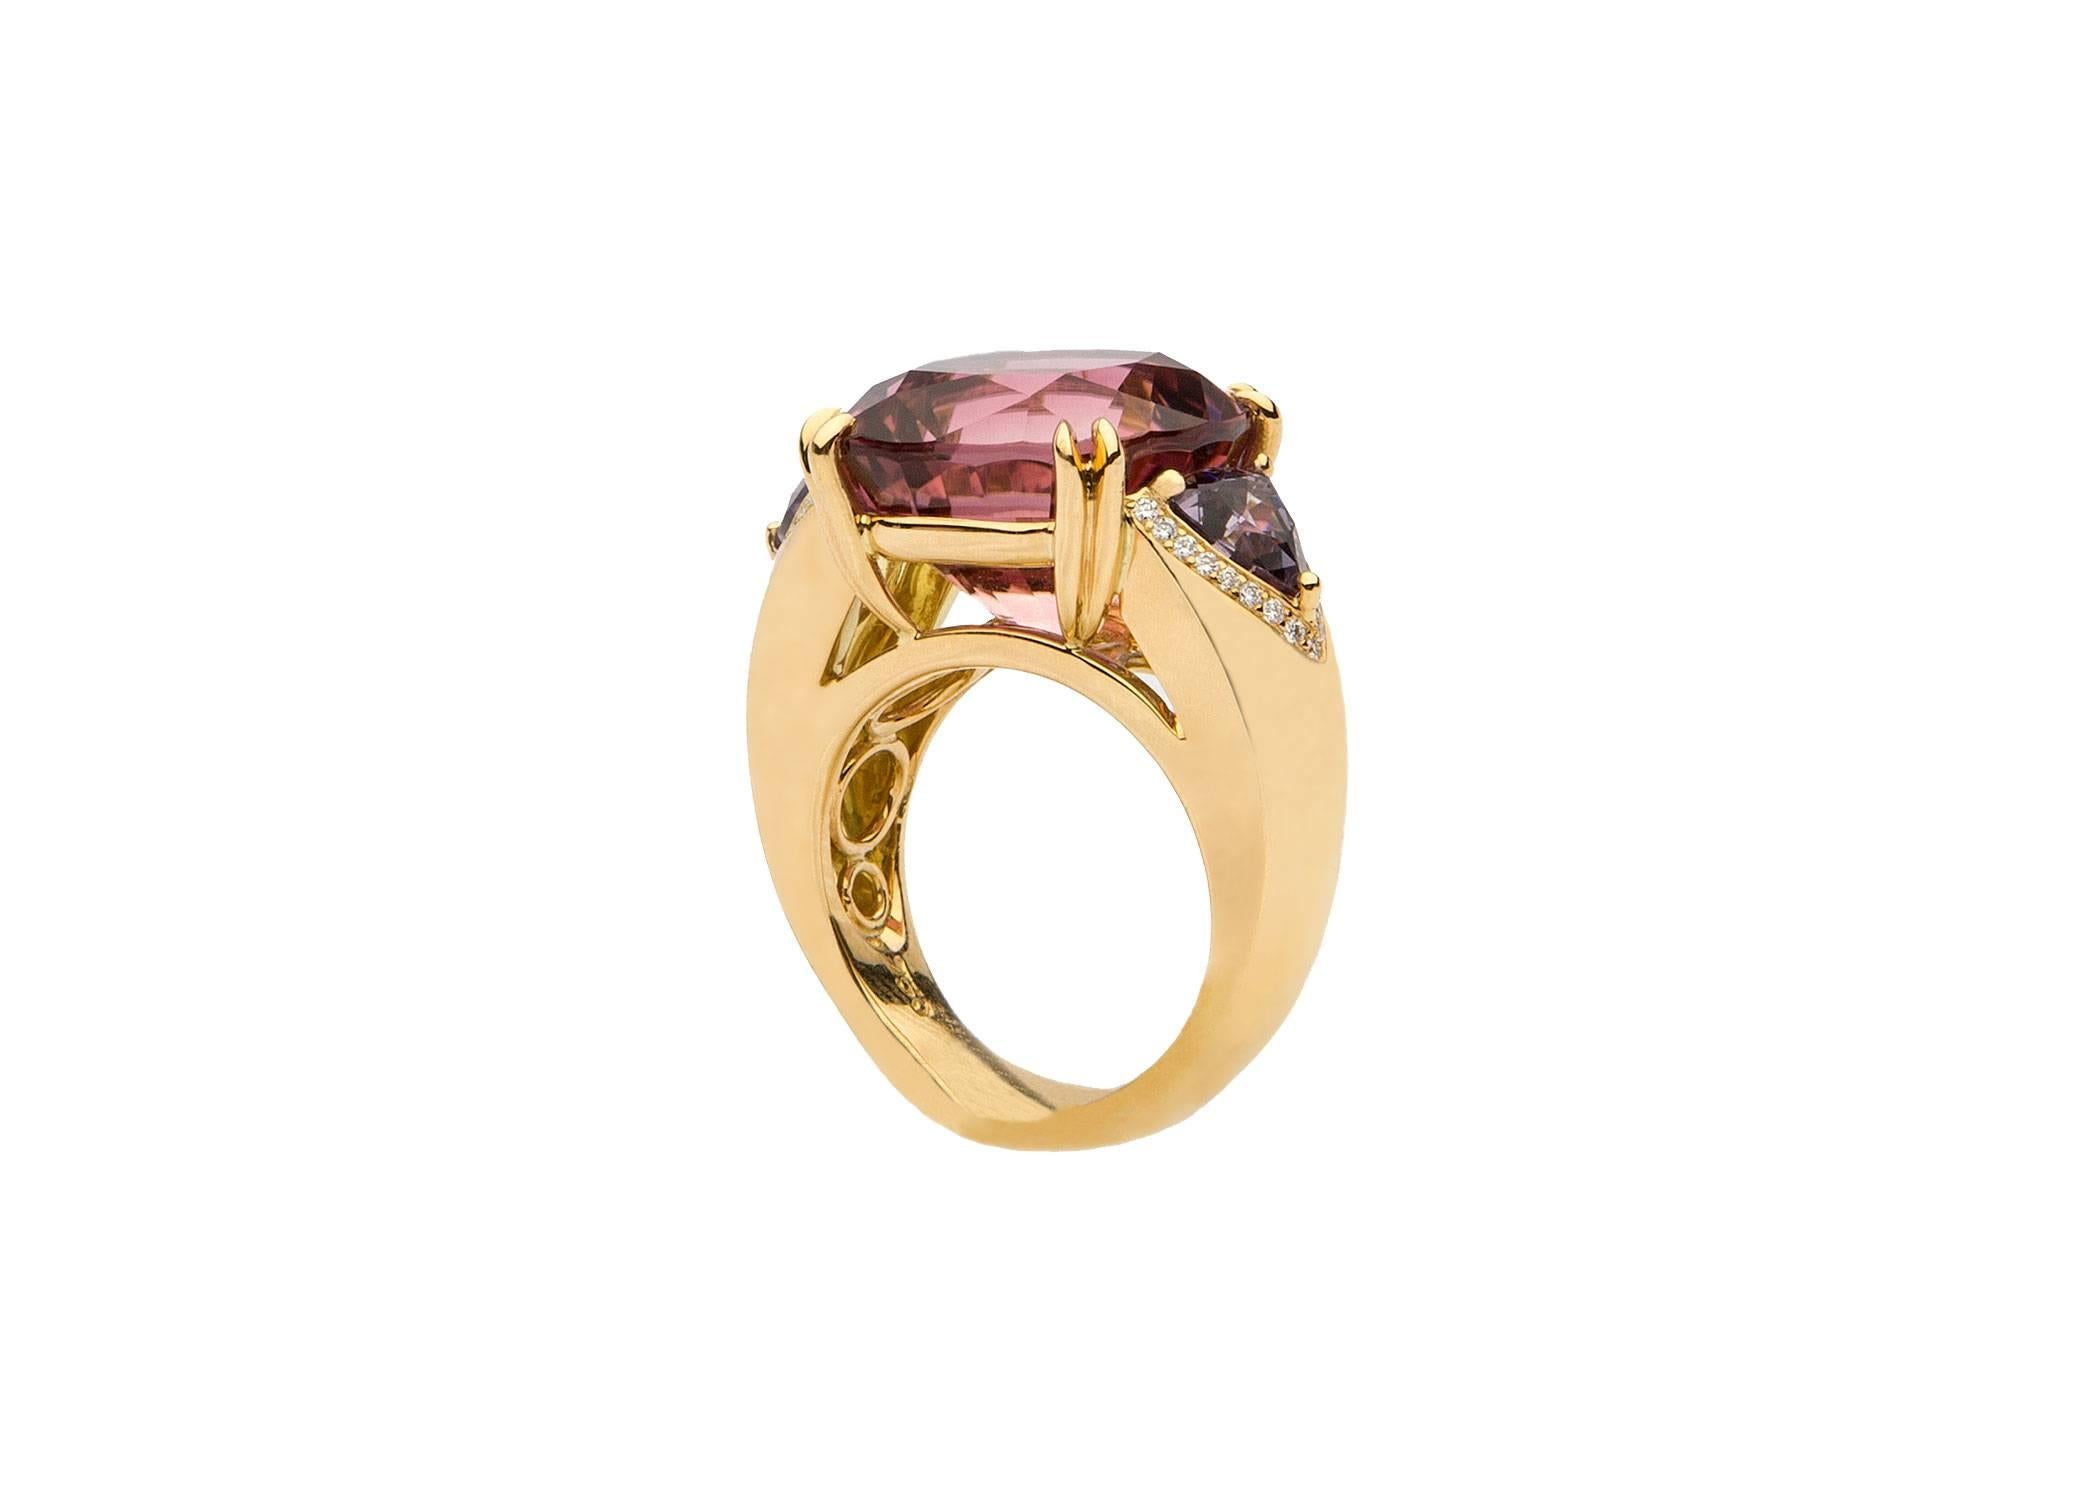 A spectacular 16.11 carat cushion cut tourmaline is flanked by a matched pair of trillion cut spinels and finished with small brilliant cut diamonds. Delicate pink and violet are a great color combination in this custom handmade David Precious Gems